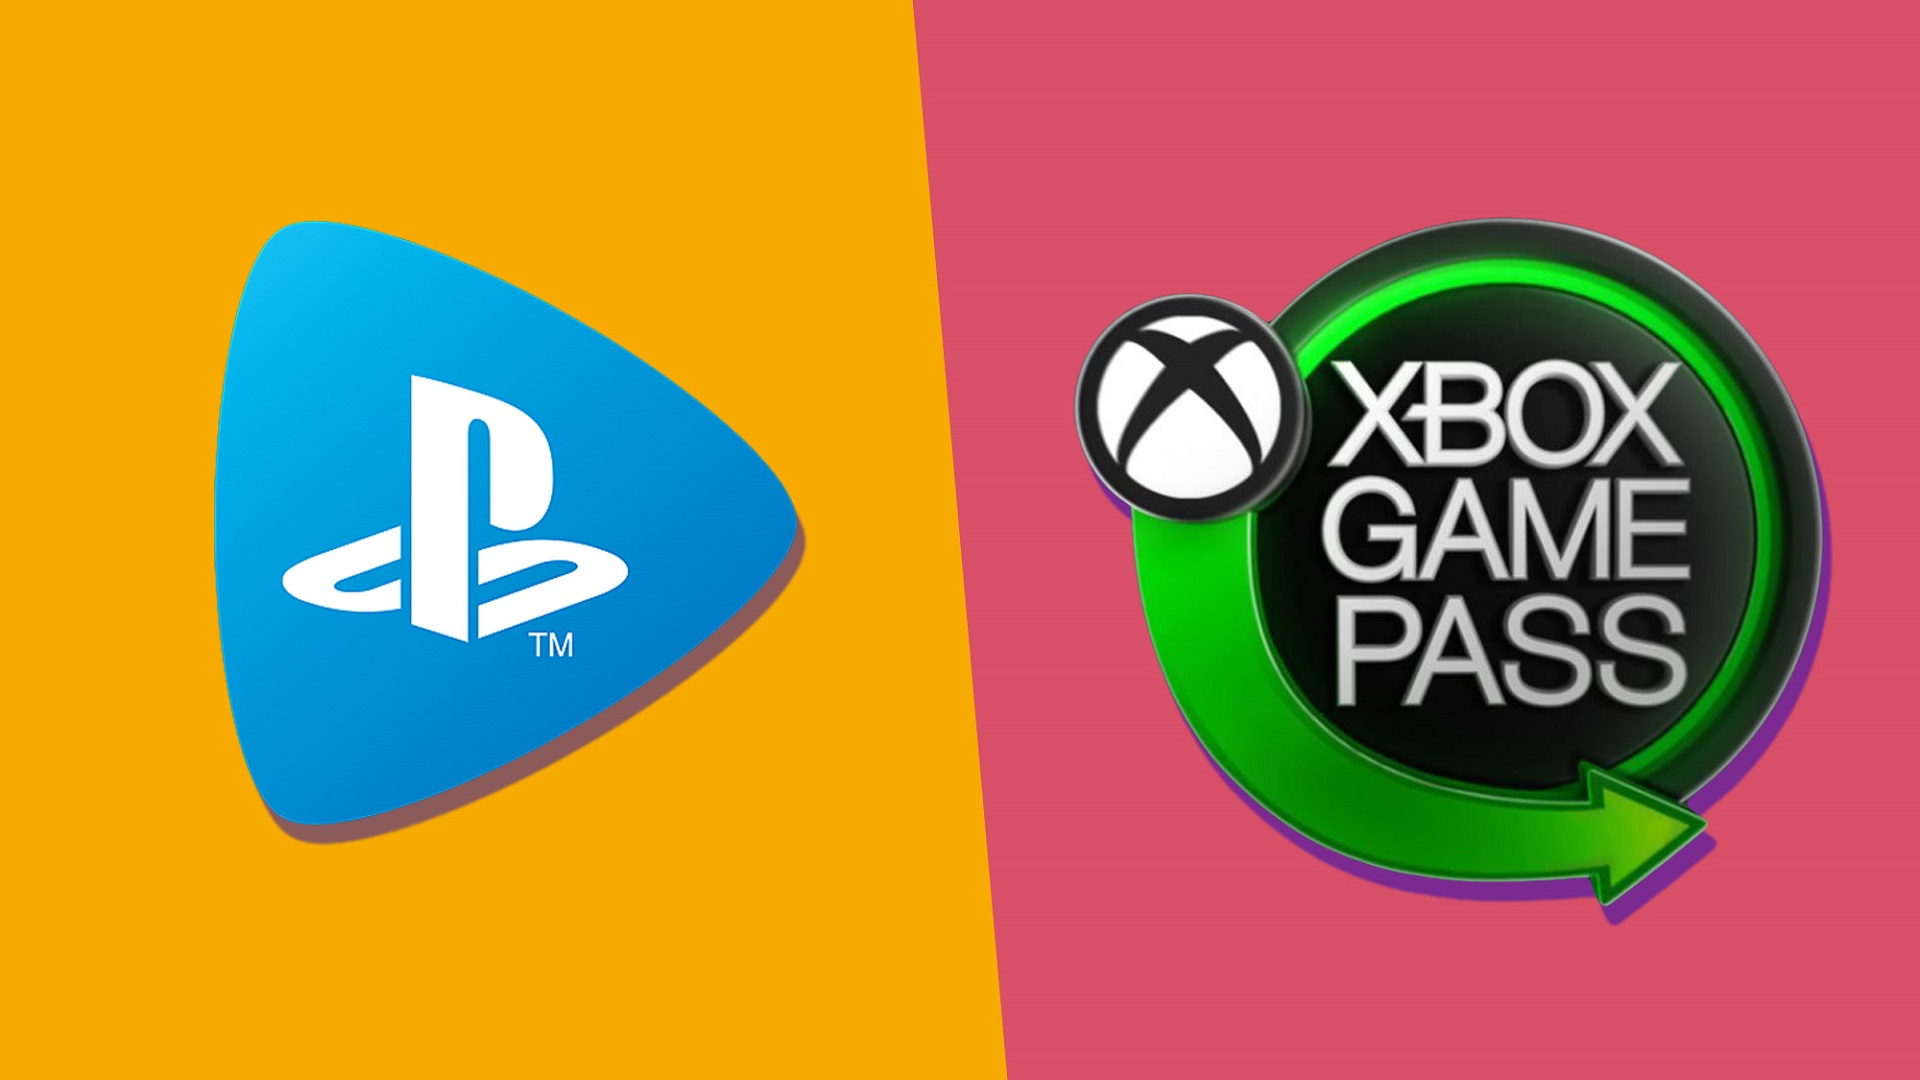 Xbox Game Pass Vs PlayStation Plus